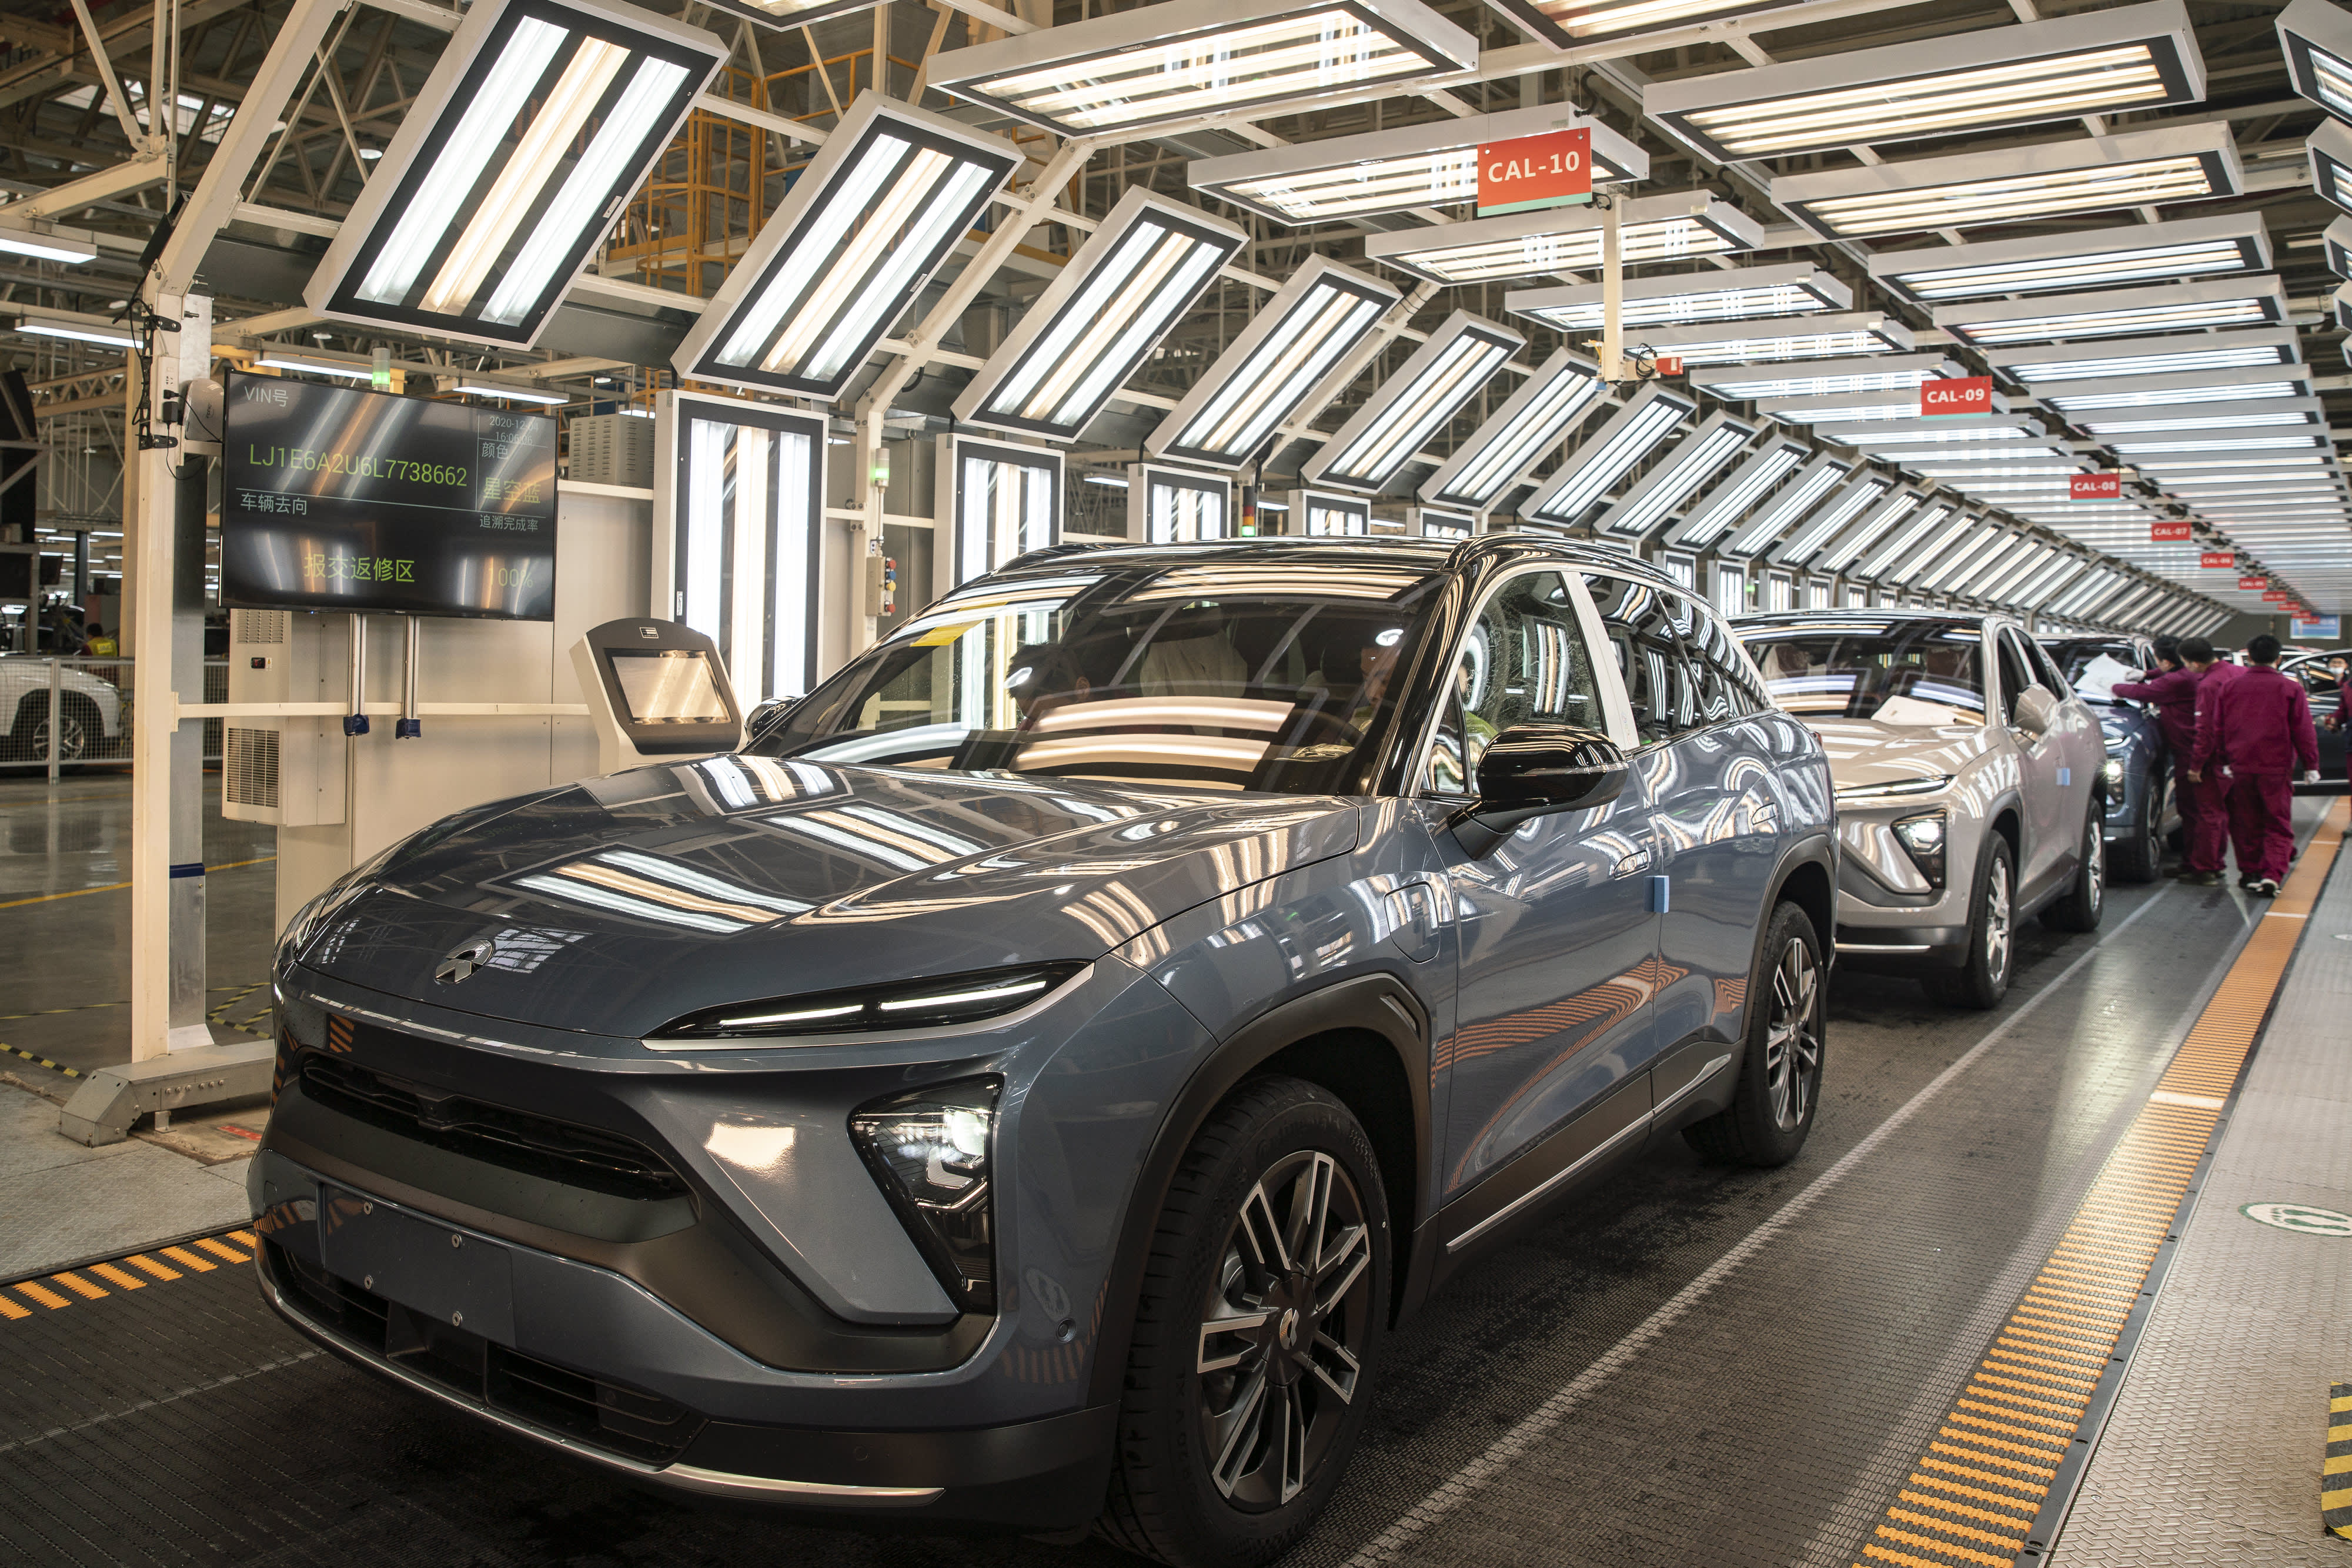 Chinese EV start-up Nio closes factory for 5 days due to chip shortages